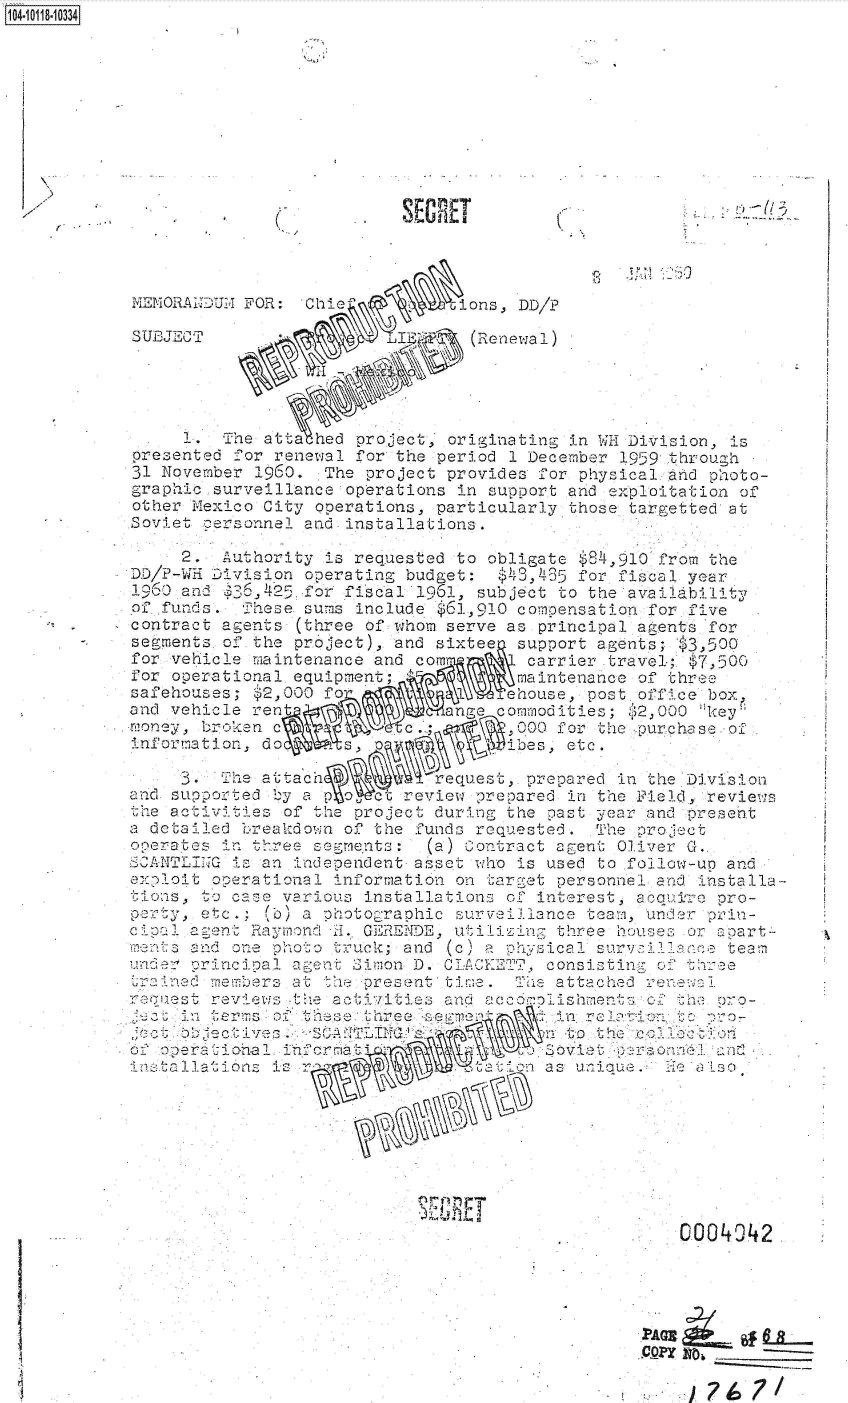 handle is hein.jfk/jfkarch39001 and id is 1 raw text is: 










                             IT

                                           %


MEMORANDUM1- FOR: Cie          ions, DD/P

SUEJECT                  IA(Renewal)





     1    . e atta hed project, originating in WH Division, is
presented for renewal for the period 1 December 1959 through
31 November 1960. The project provides for physical ahd photo-
graphic surveillance operations in support and e ploitation of
other Mexico City operations, particularly those targetted at
Soviet cersonnel and installations.

     2.  Authority 1s reauested to obligate $84,910 from the
DD/P-WH Division operating budget: $43,435 for fiscal year
1960 and  36,425 *for fiscal 1961, subject to the avail bility
of funds.  These sums include $61,910 compensation for five
contrac  agents (three of w hom serve as principal agents for
segments of the project), and sixteea support agents; $3,500
for vehicle maintenance and com       carrier travel; $7,500
for operational equipment; maintenance of three
safehouses; $2,000 fo               chouse, post, office box,
and vehicle ren               anga comiodities; 52,000 key
money, broken                       .0  fo  the Purchase of
information, do                      bes, etc.

     L.   ne attac           request,. prepared in the Division
and supported by ap       revieve prepared in the Field, revies
the a civities of the project during the past year and prese.t
  dc tailed breakdo;n of* the funds requested. The proe 0ct
pera-tes in three serments: (a) Contract agent Oliver G.
          is an independent asset who is used to .follow-un and
exelit  operational information on target personnel and installa-
ons,   to case various installations of interest, acq e pro-
pDrty, etc.; (b) a photoraohic surveilnce  tei,  Under p r-
cia   a2ent Raymond H. GeEEDE, utili n  three houses or apart-
mni  a -nd one p 10to truck; and c c) a c sical surysillace t eam
      unr cncj.ial a!e nt  imon D. CLACFETT  consisting o.  e
trai   emeers  at. the pres ent tim. To attached ren5a
r'e-st  review t   activities and  cco ol ishments oDt- ar-
        in m  a: ts   three se          in re z To
    et becti:veJs. 8     Ito the c'OR
          ot per: 'cha no' 0a So at n n
   ations i                          o  s ui








          a*                                        000 2I






                                                PACM
    4                                           C.-OPY NO __ _


